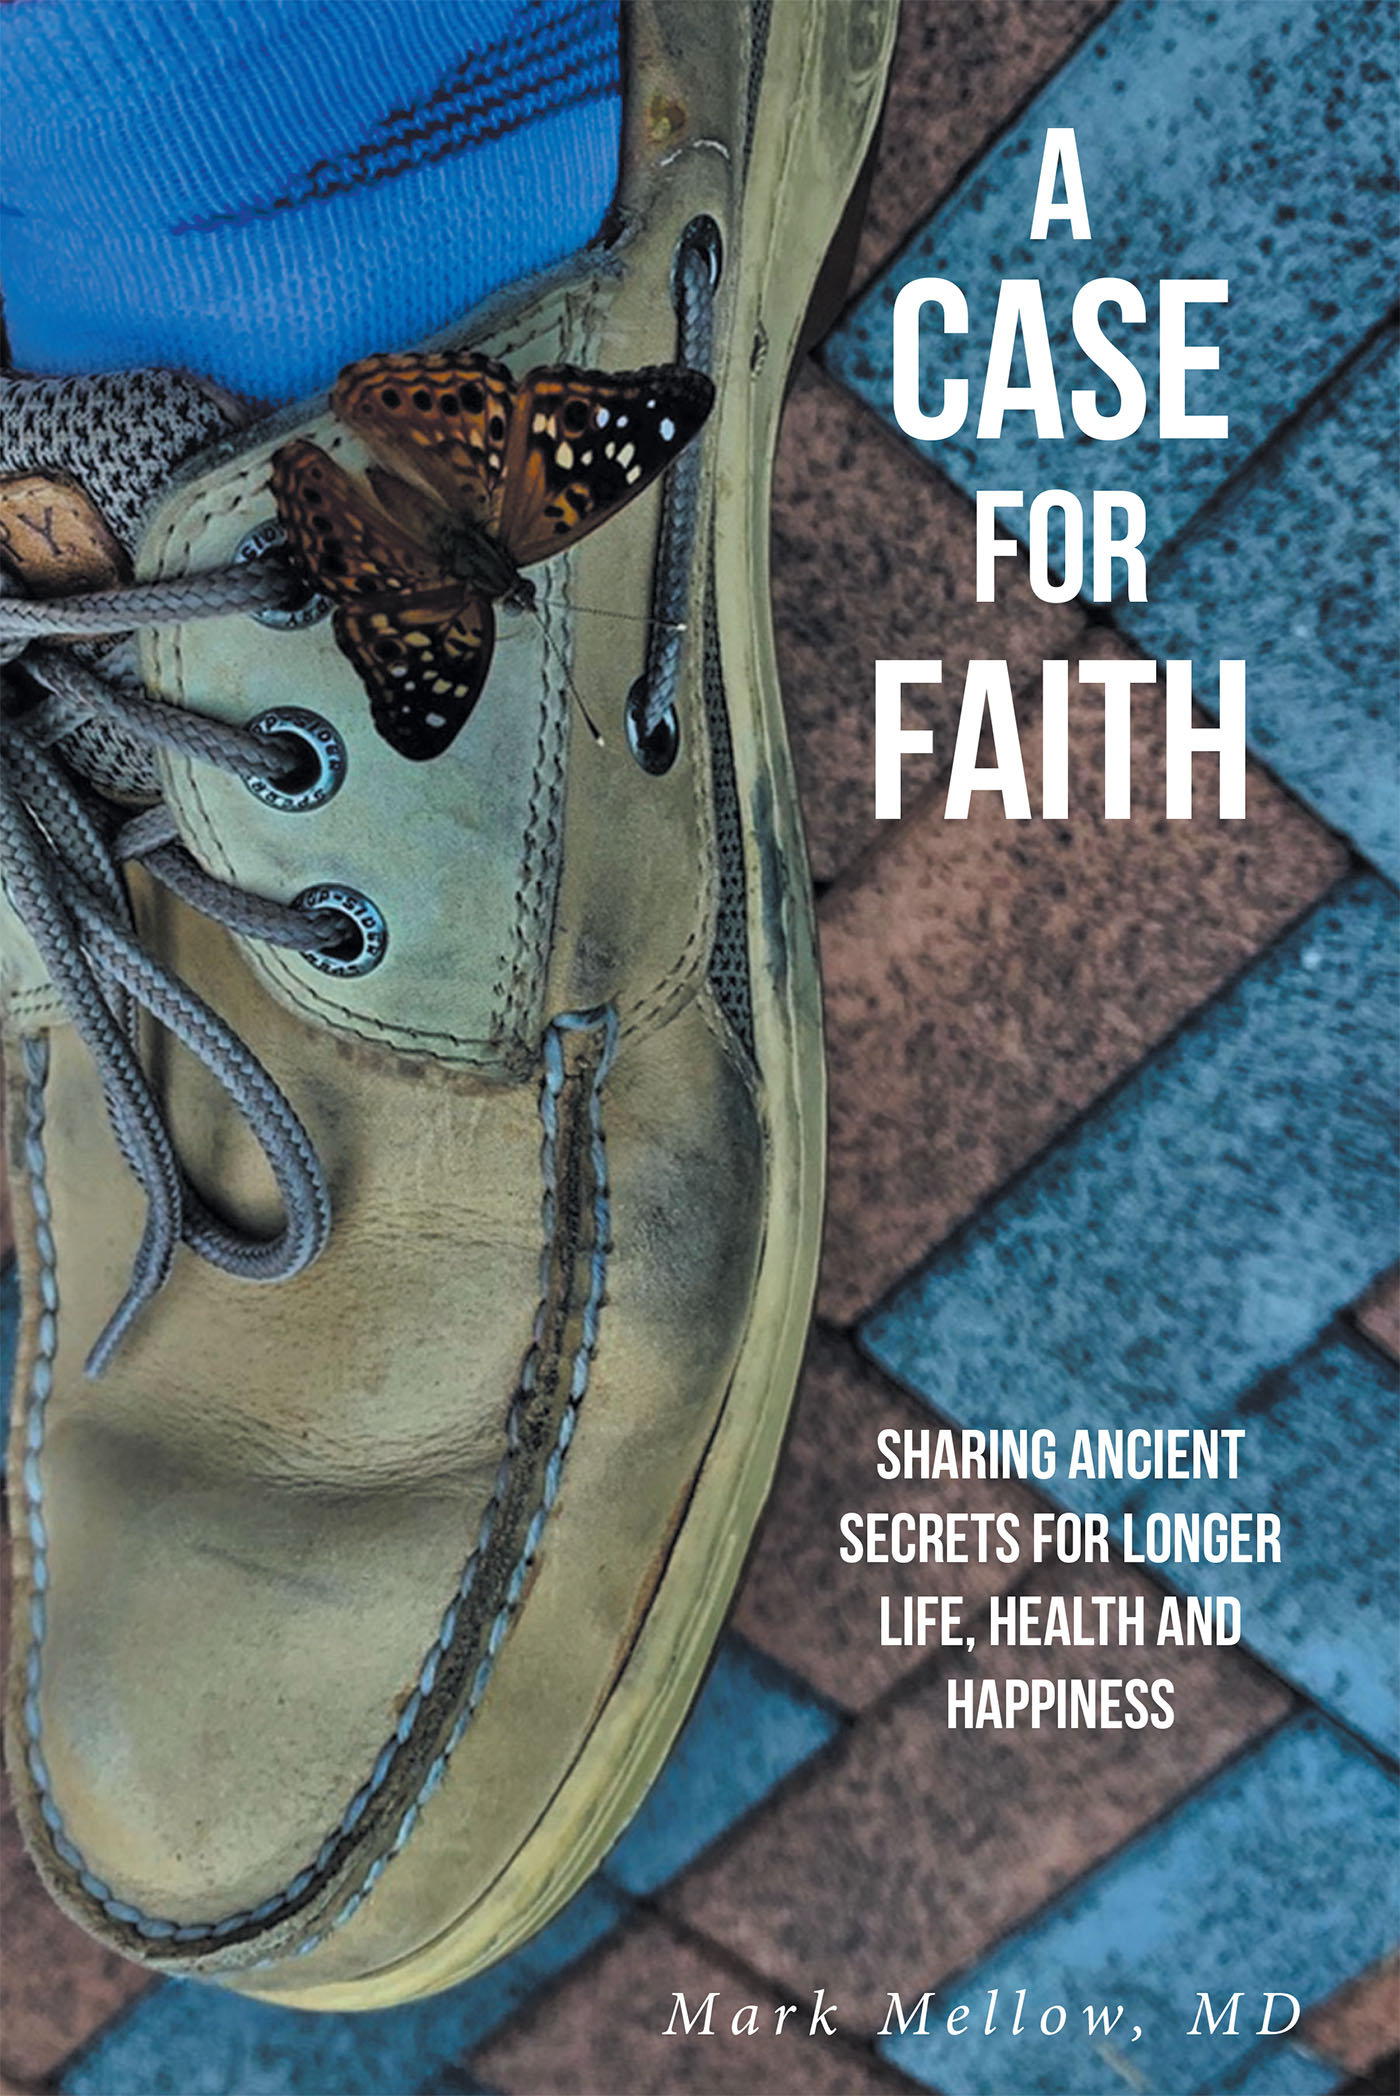 Author Mark Mellow, MD’s New Book, "A Case for Faith: Sharing Ancient Secrets for Longer Life, Health and Happiness," Explores the Link Between Faith & Physical Wellness